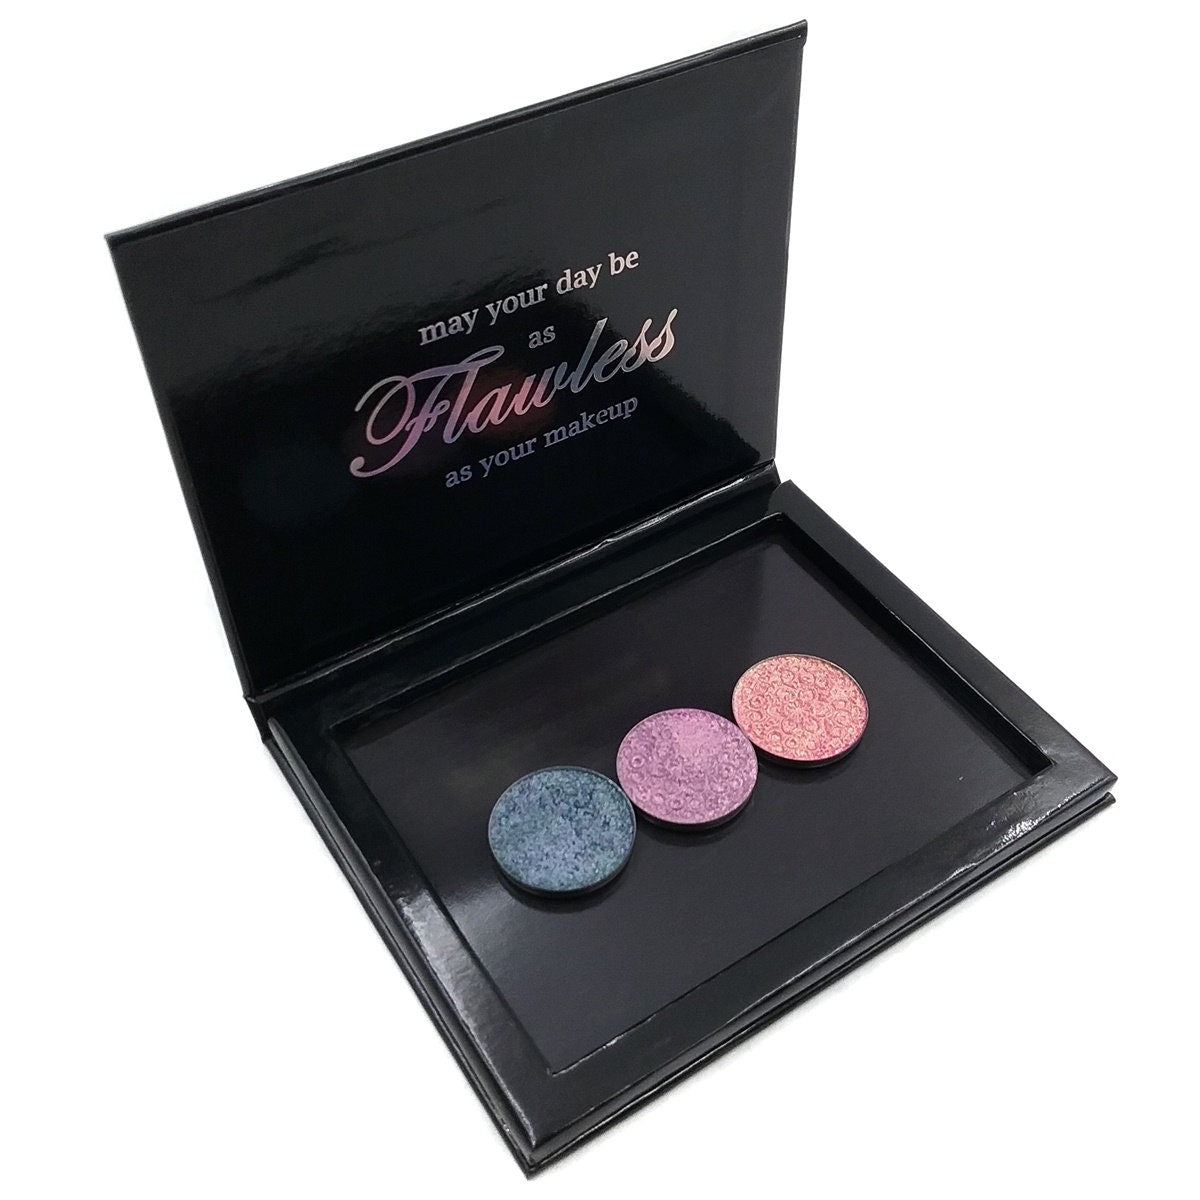 Freestyle Magnetic Palette 12 Pan